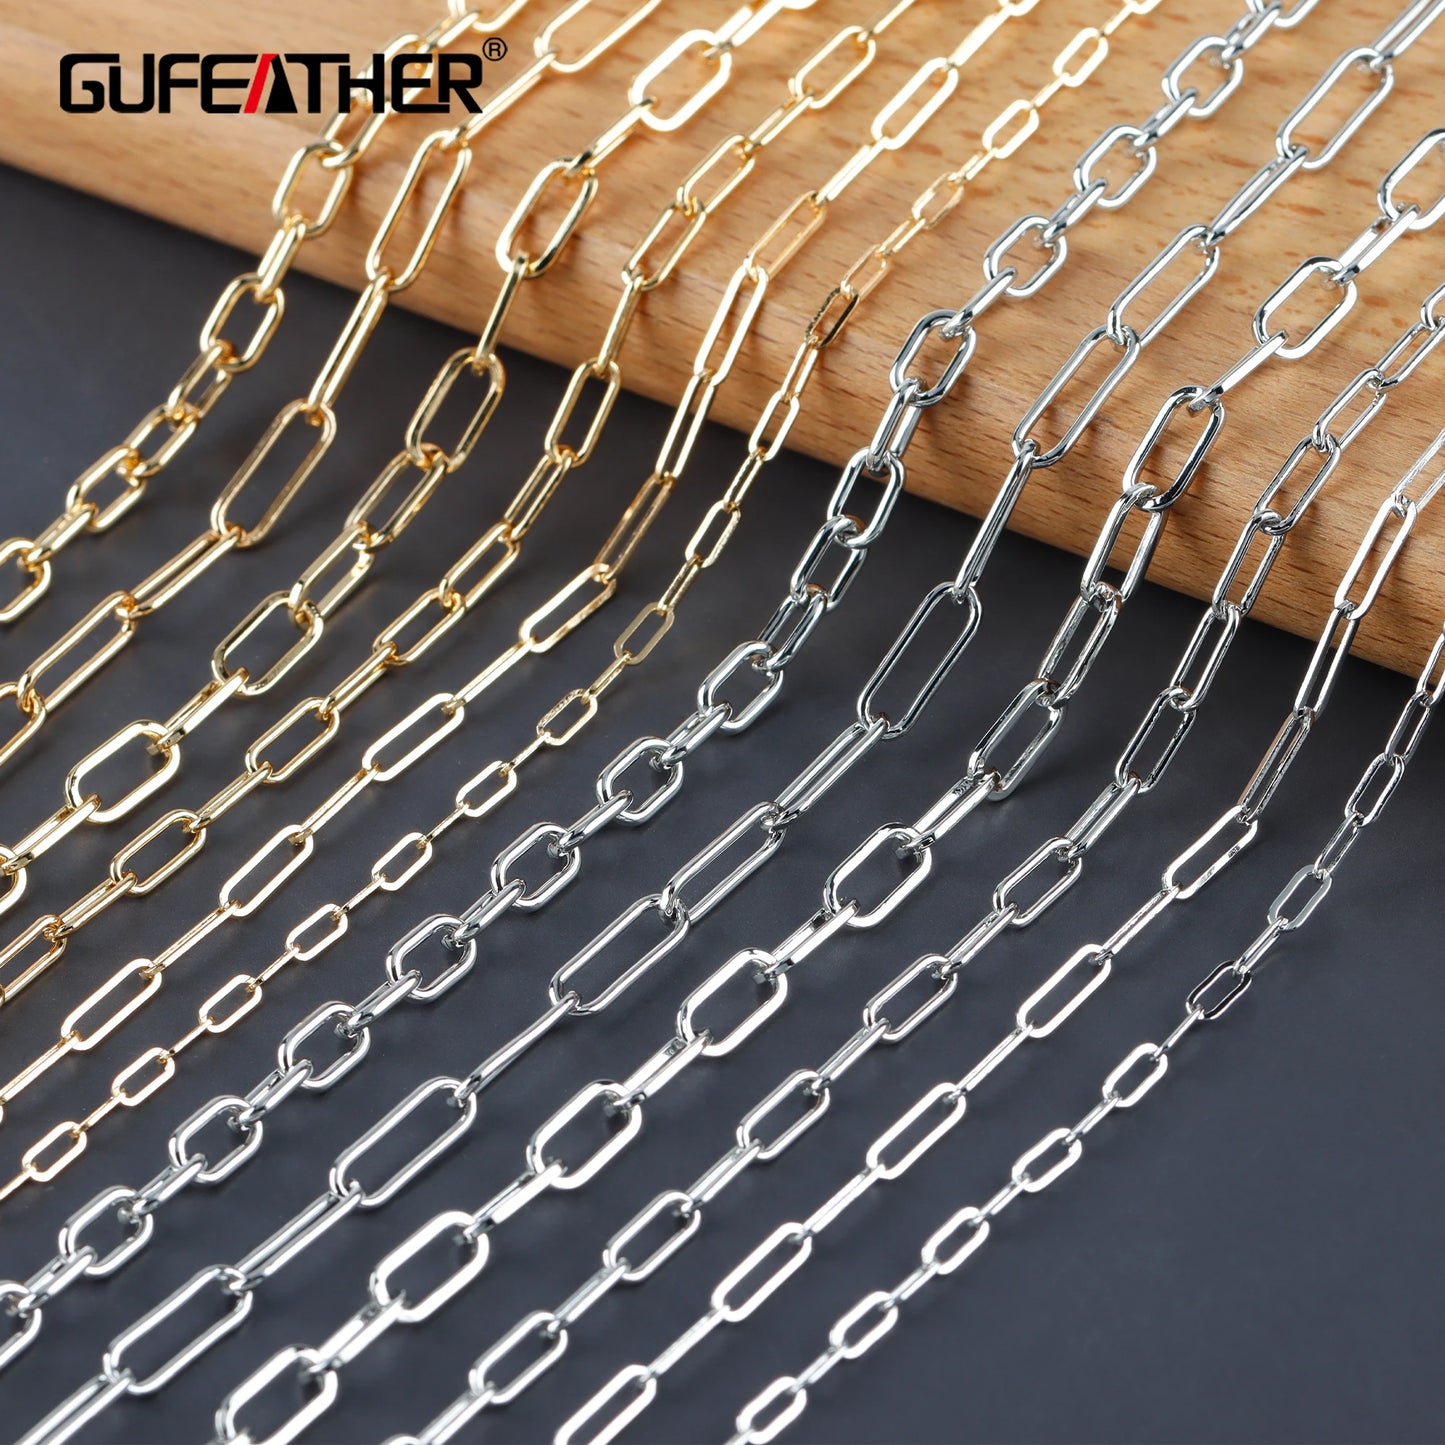 GUFEATHER C201,diy chain,pass REACH,nickel free,18k gold rhodium plated,copper,charm,diy bracelet necklace,jewelry making,1m/lot